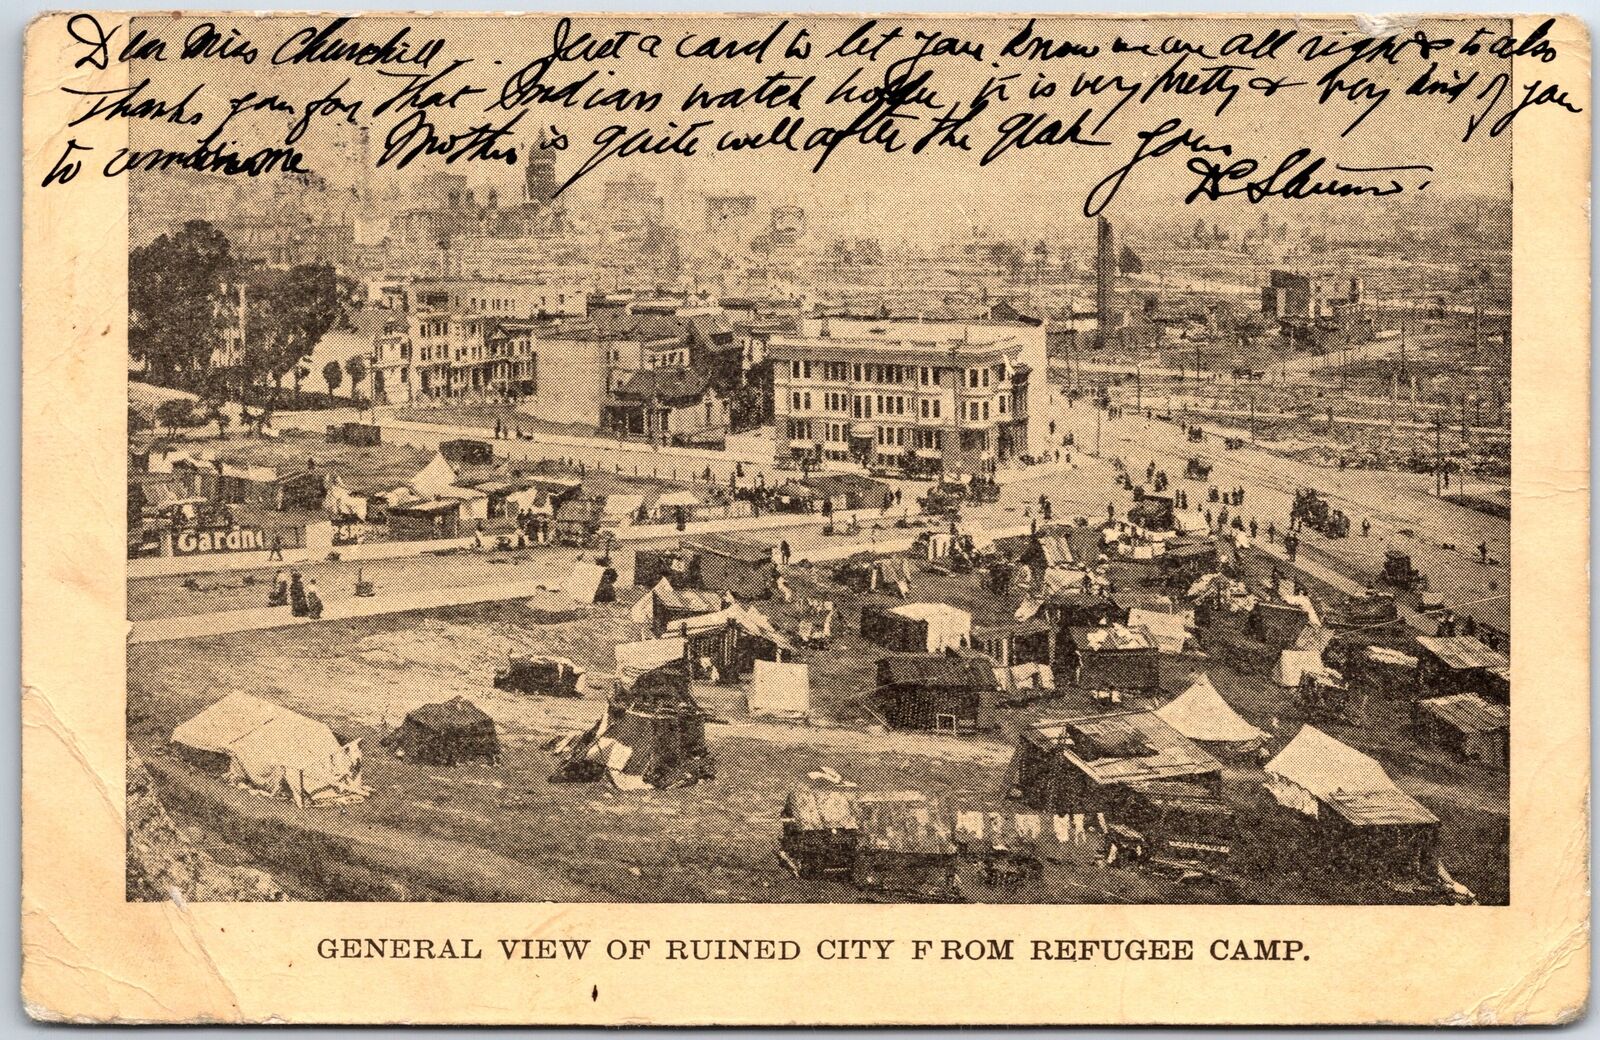 VINTAGE POSTCARD VIEW OF EARTHQUAKE-RUINED SAN FRANCISCO FROM REFUGEE CAMP 1906